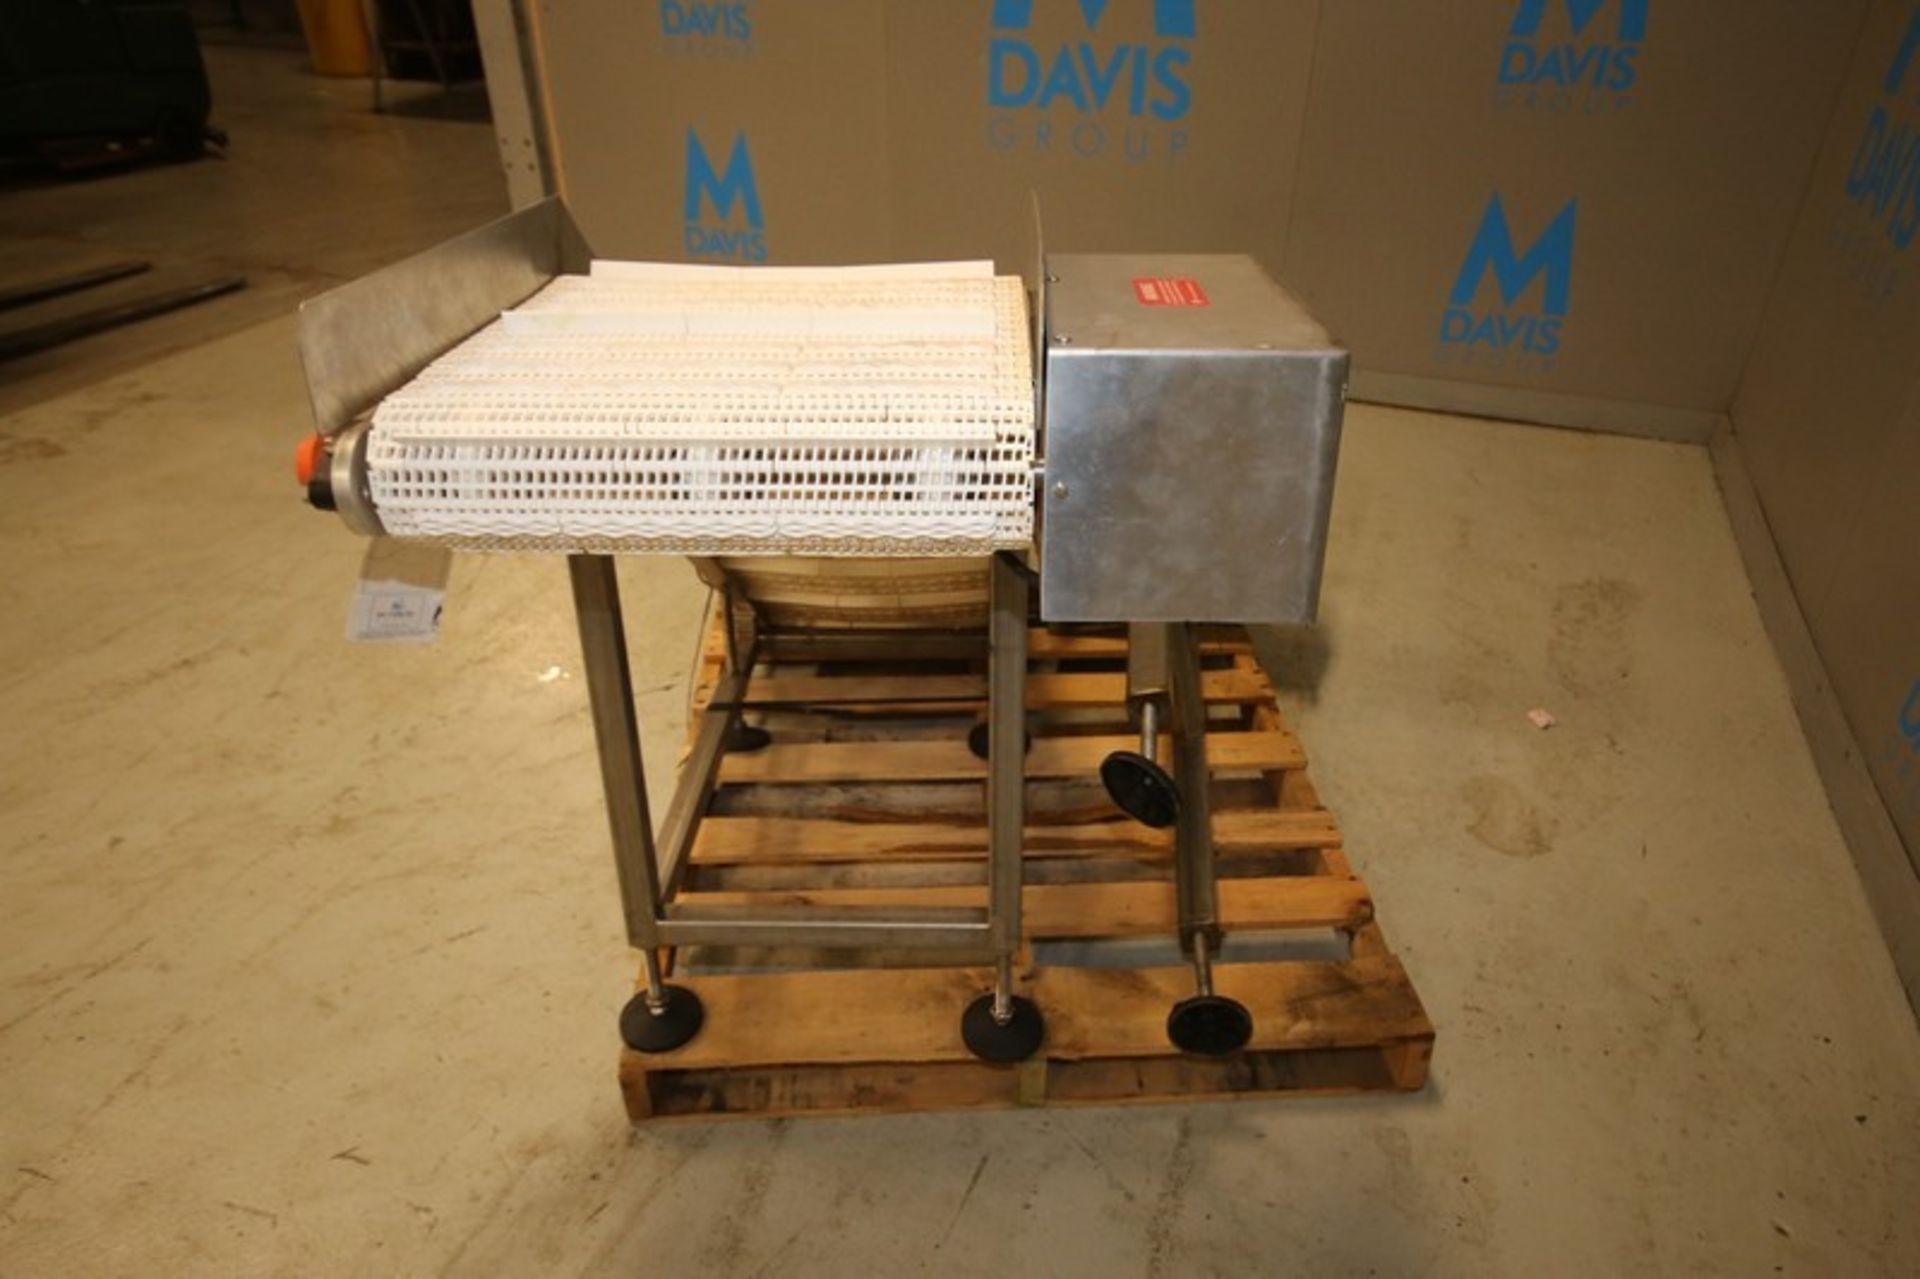 Universal Packaging Inc Aprox 7' L x 39" H x 18" W S/S Inclined Conveyor, Model TC.18.72, SN 1713 - Image 4 of 6